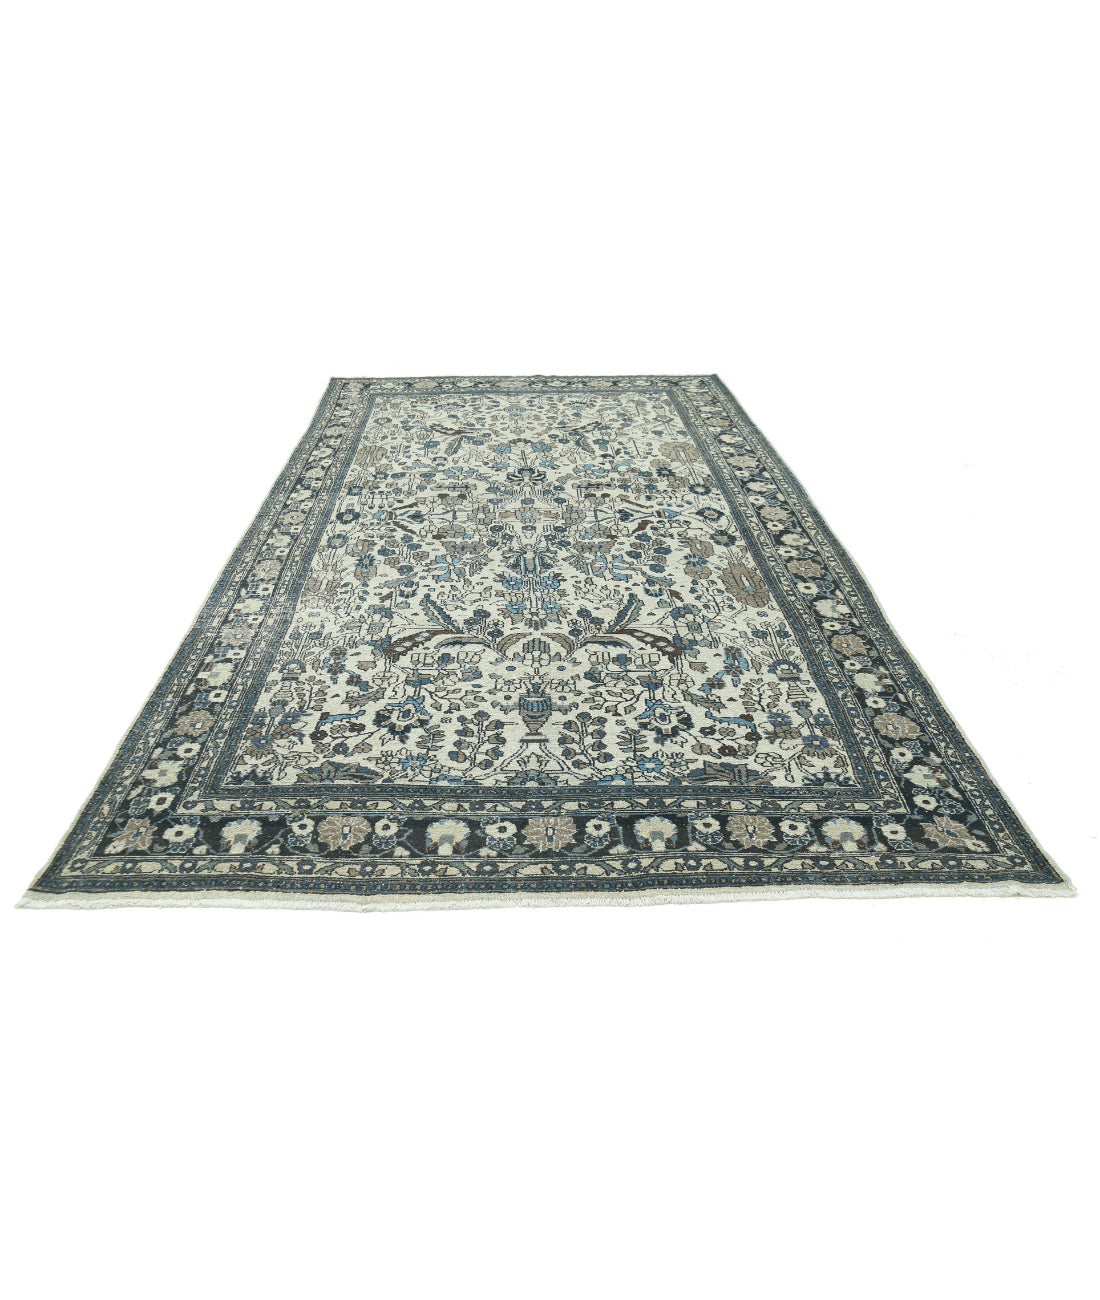 Hand Knotted Vintage Persian Bakhtiari Wool Rug - 7'2'' x 13'0'' 7'2'' x 13'0'' (215 X 390) / Ivory / Blue